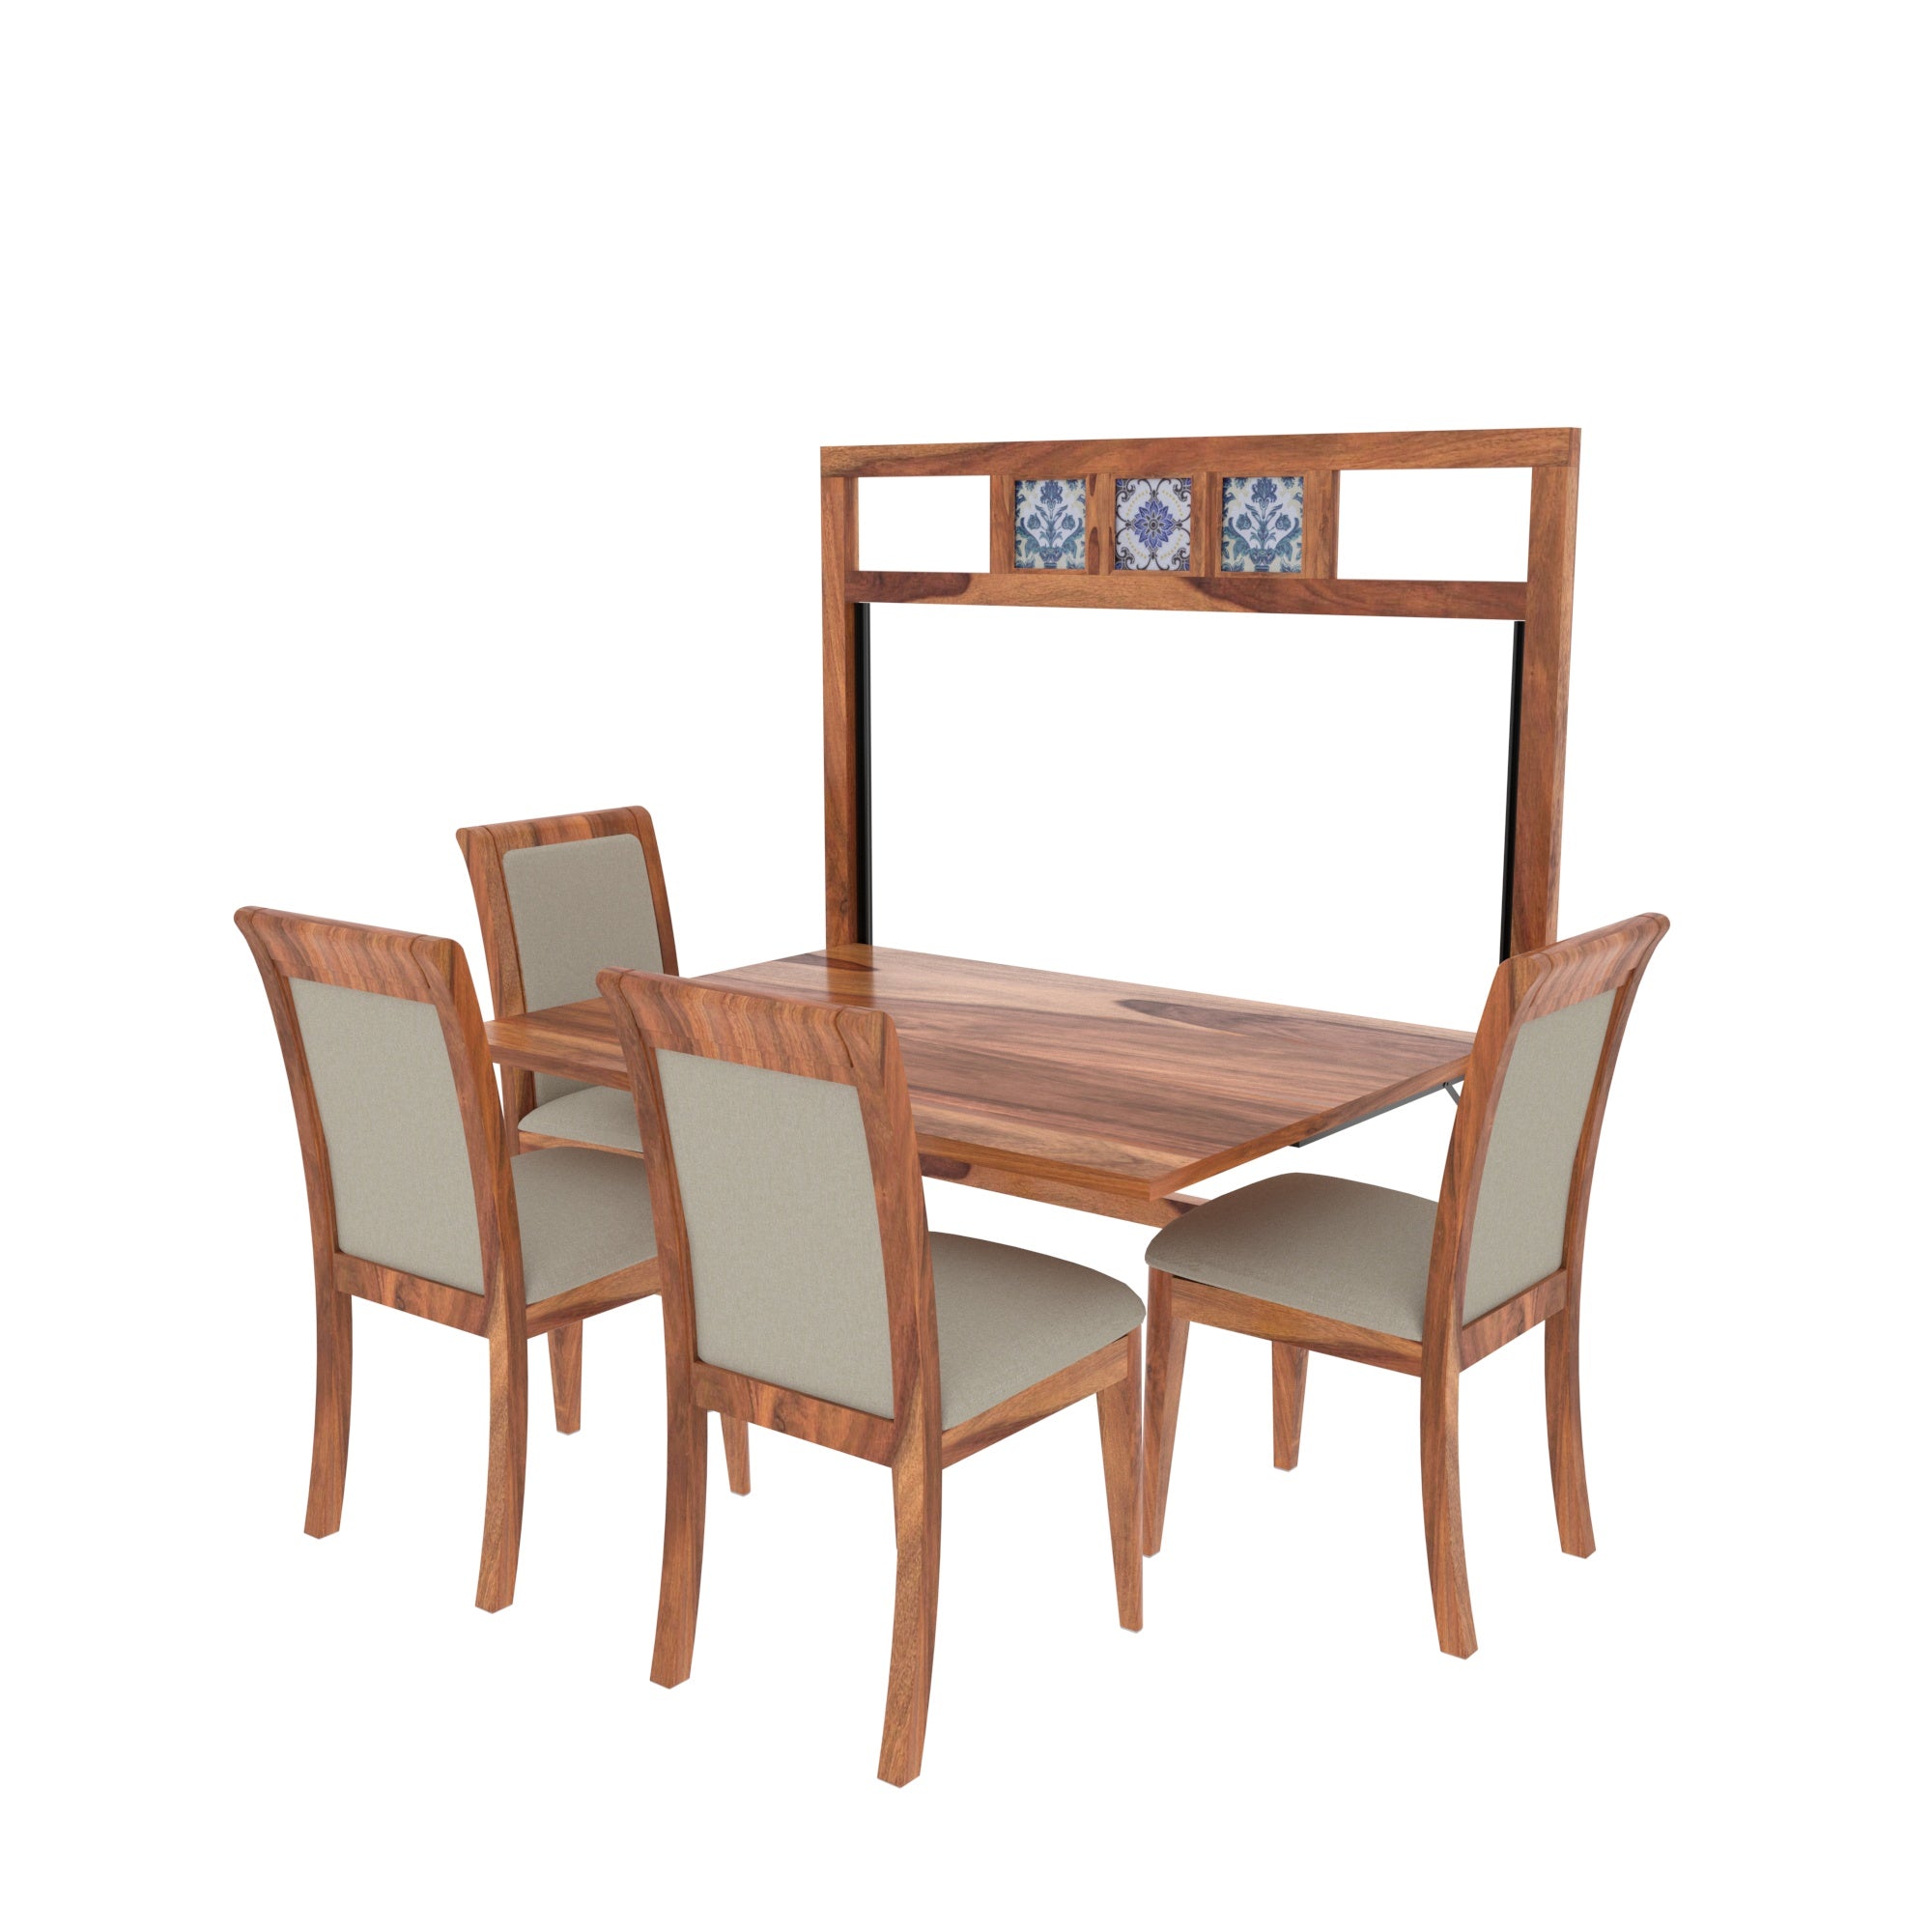 Natural Classic Light Finished Handmade Wooden Dining Set Dining Set